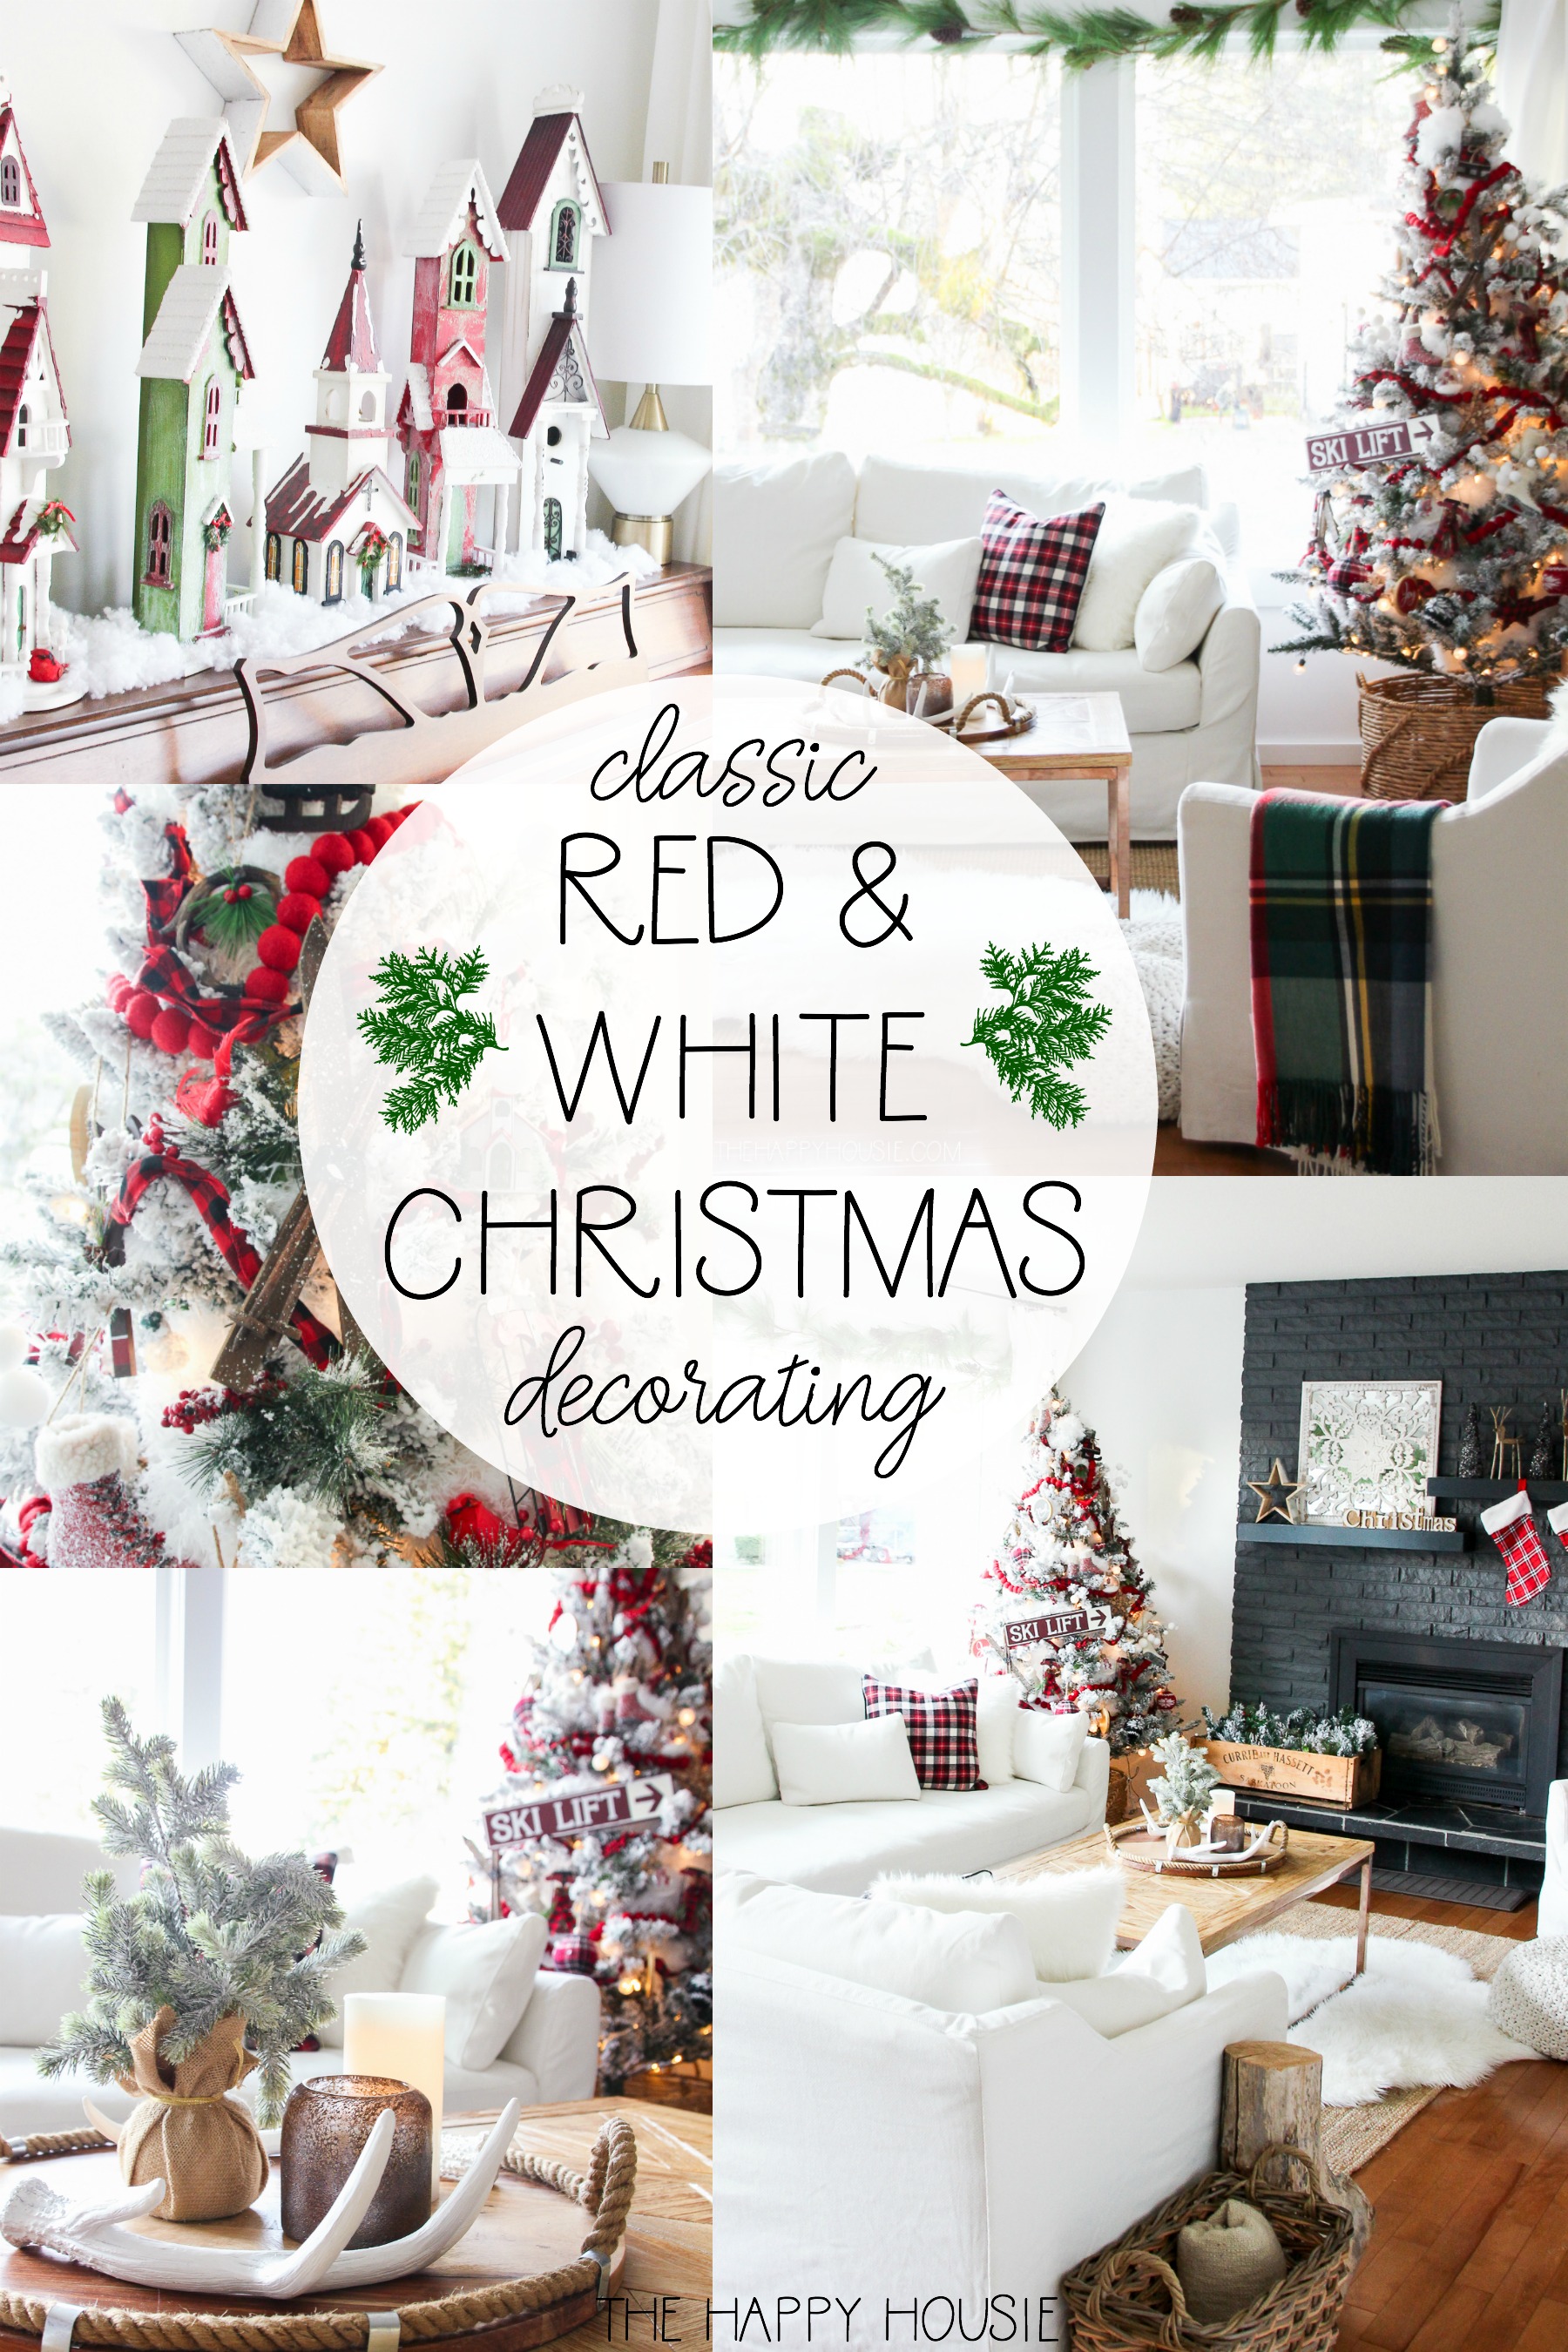 Red & White Christmas Decorating & New Living Room Tour | The ...